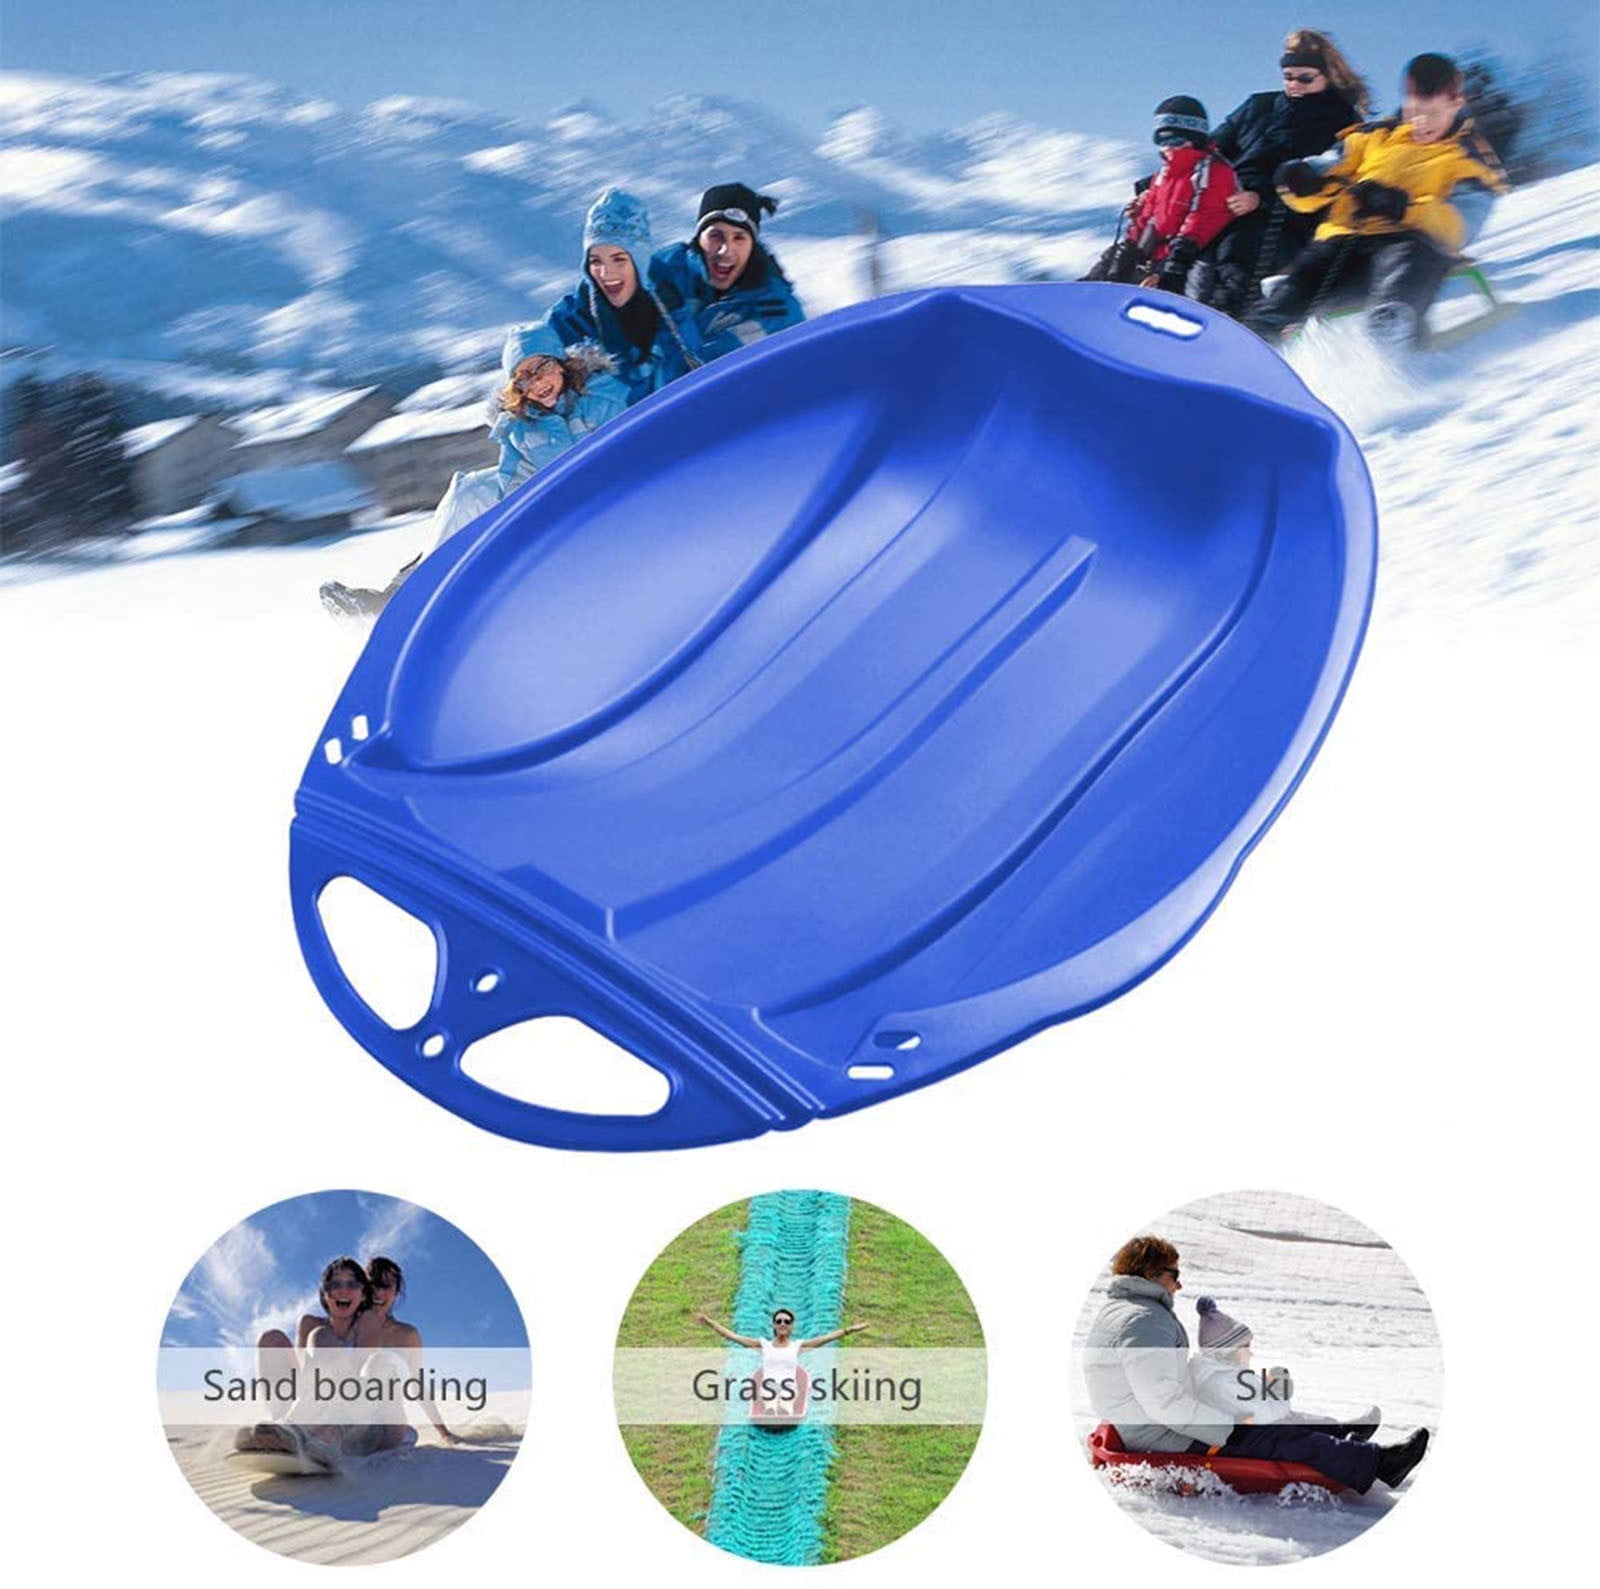 Details about   Kids Snow Sled Board Outdoor Winter Skiing Board Ski Pad Luge Snowboard Non-slip 